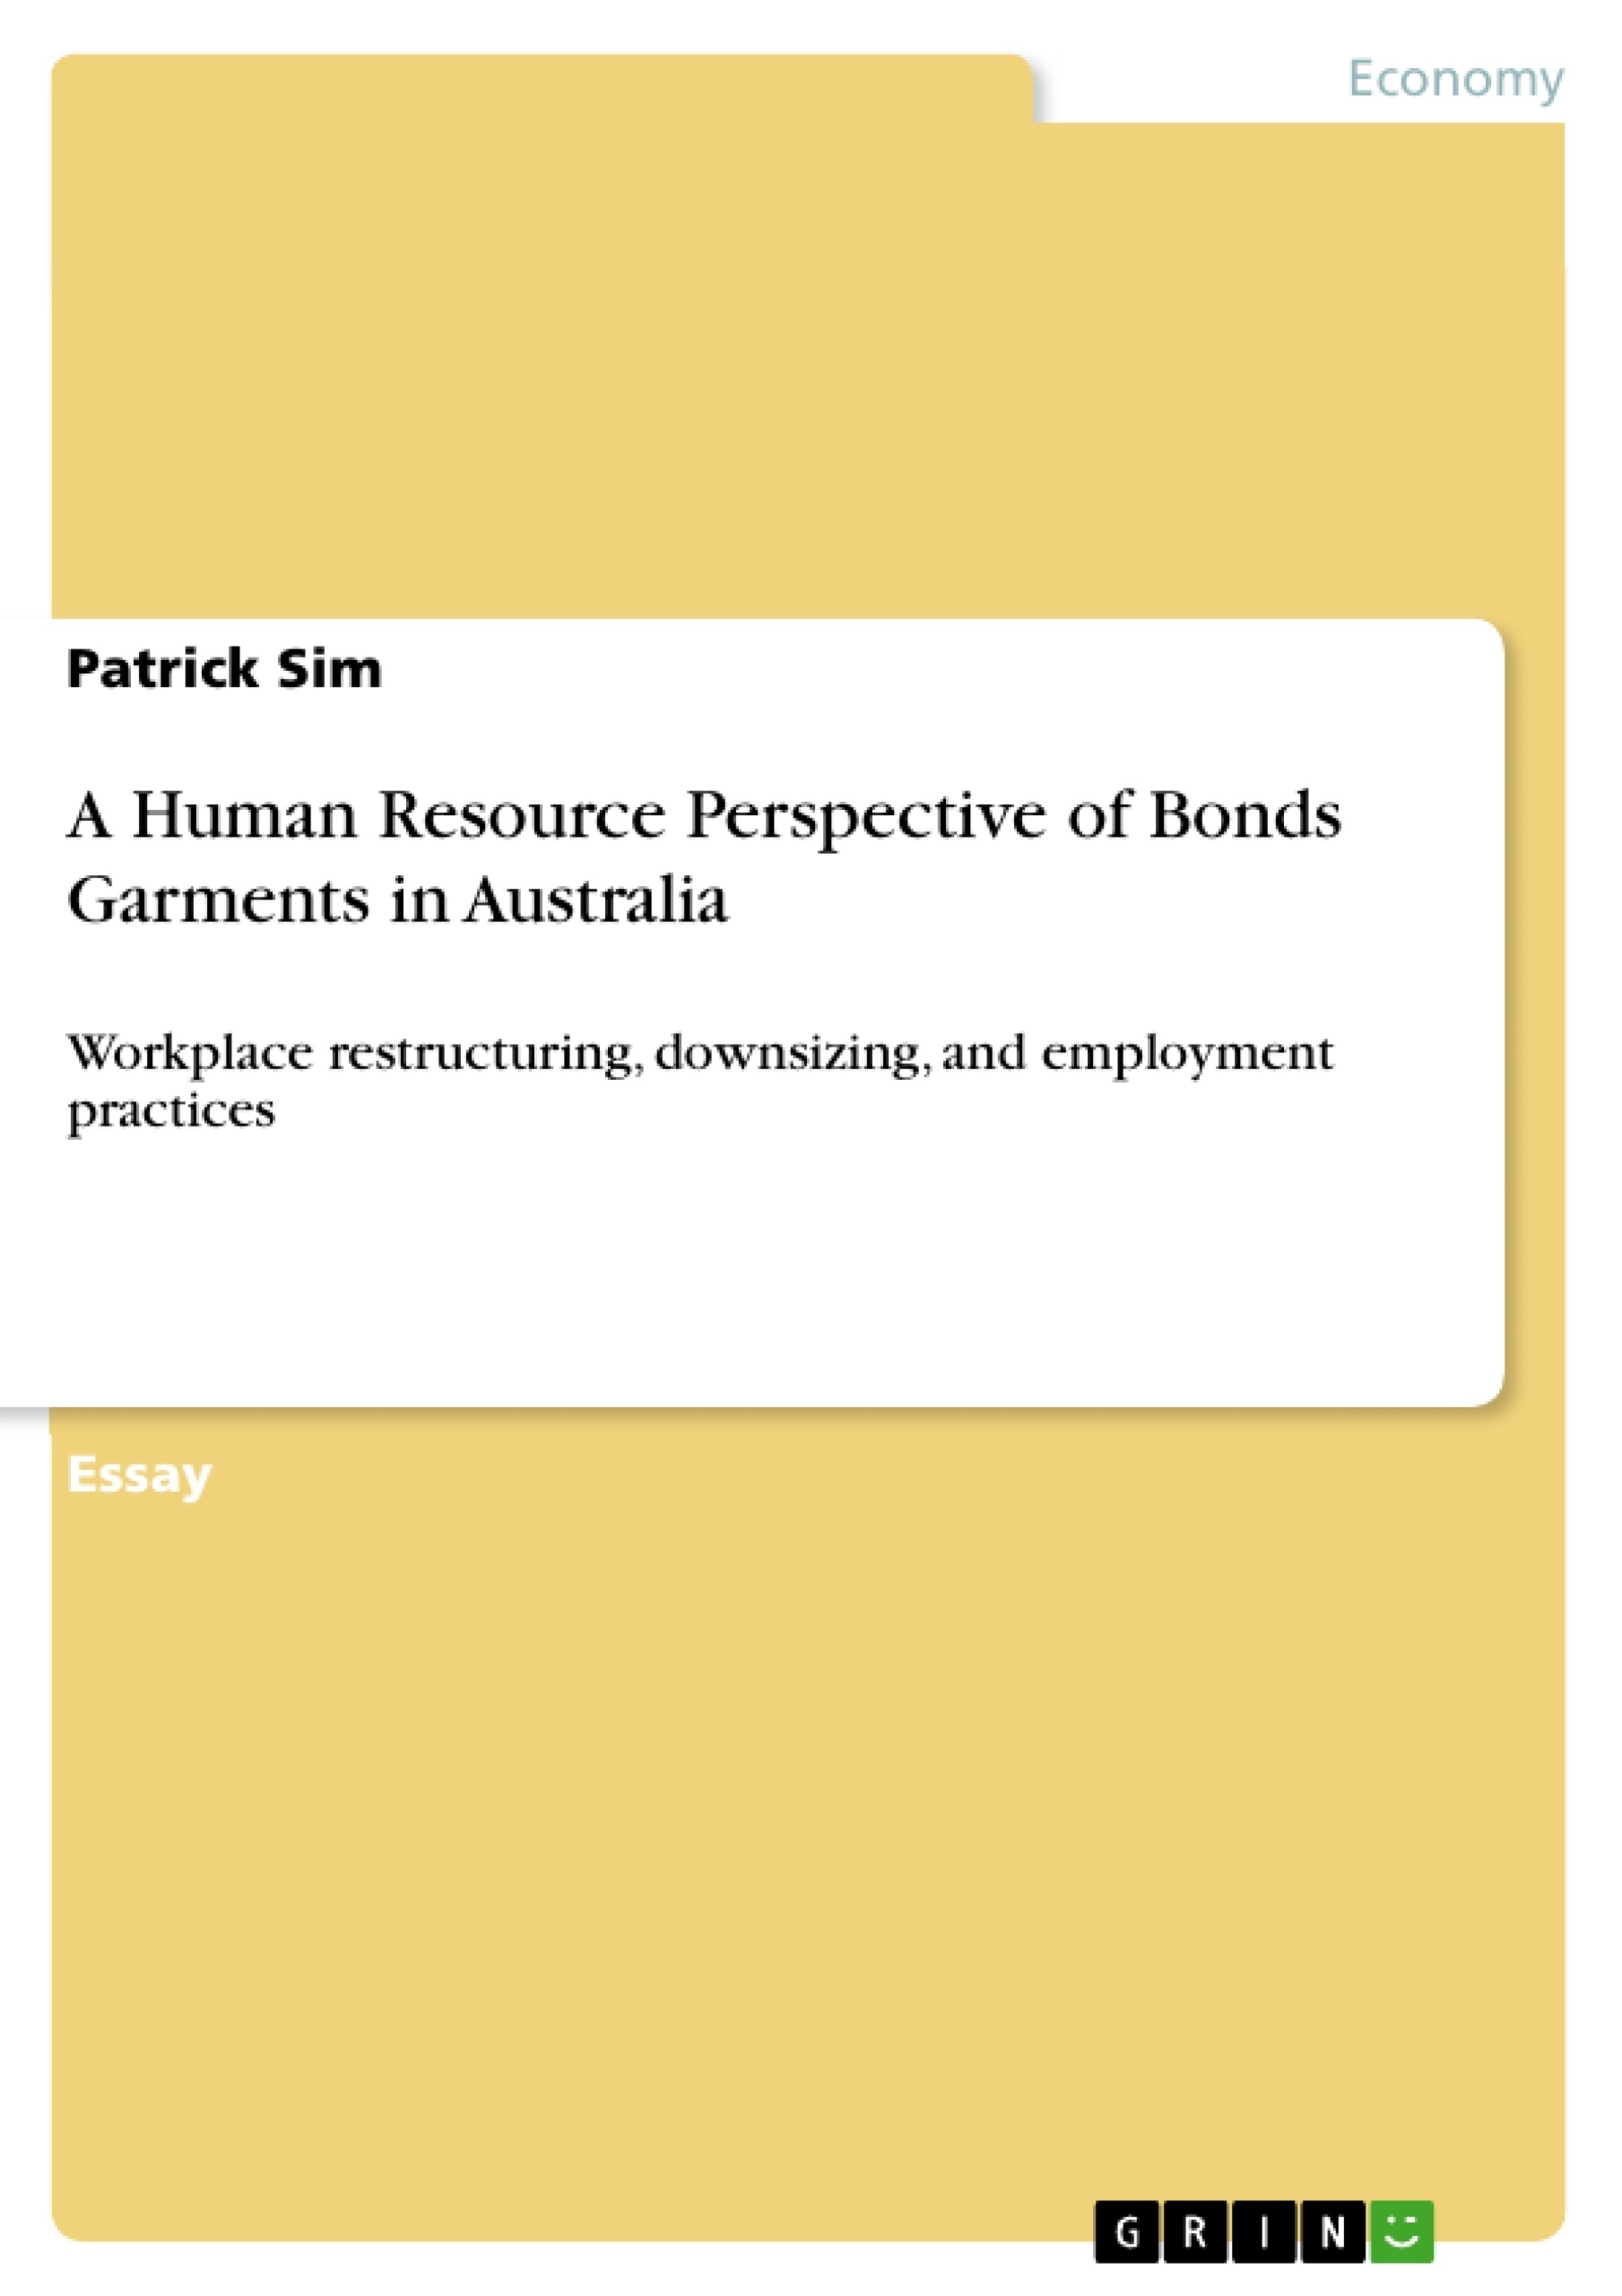 Title: A Human Resource Perspective of Bonds Garments in Australia